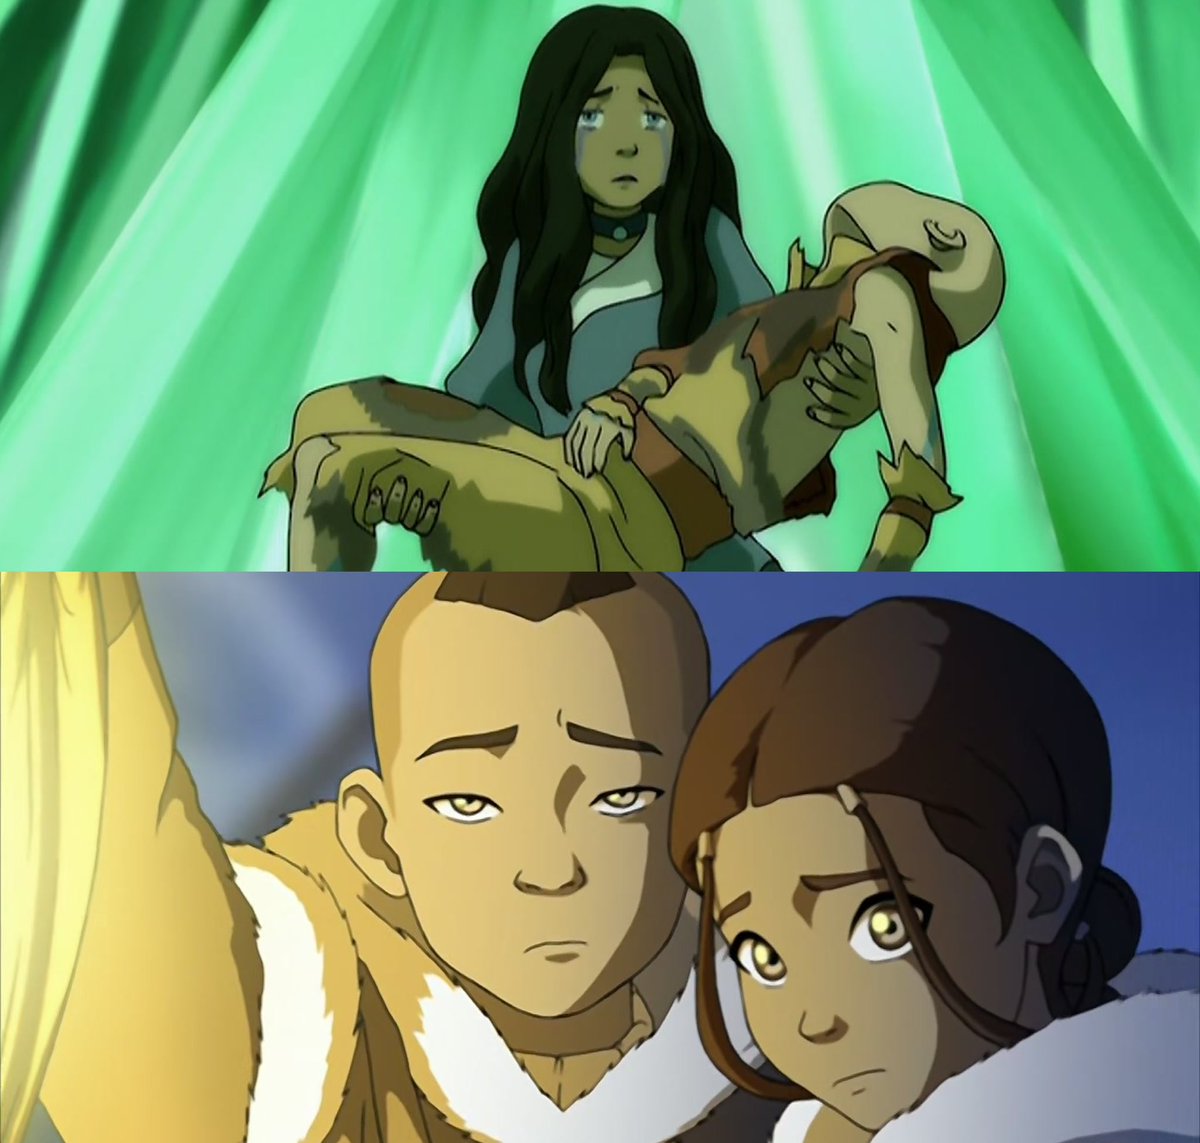 According to the writers, Katara is the narrator of the series and the story is being told from her POV